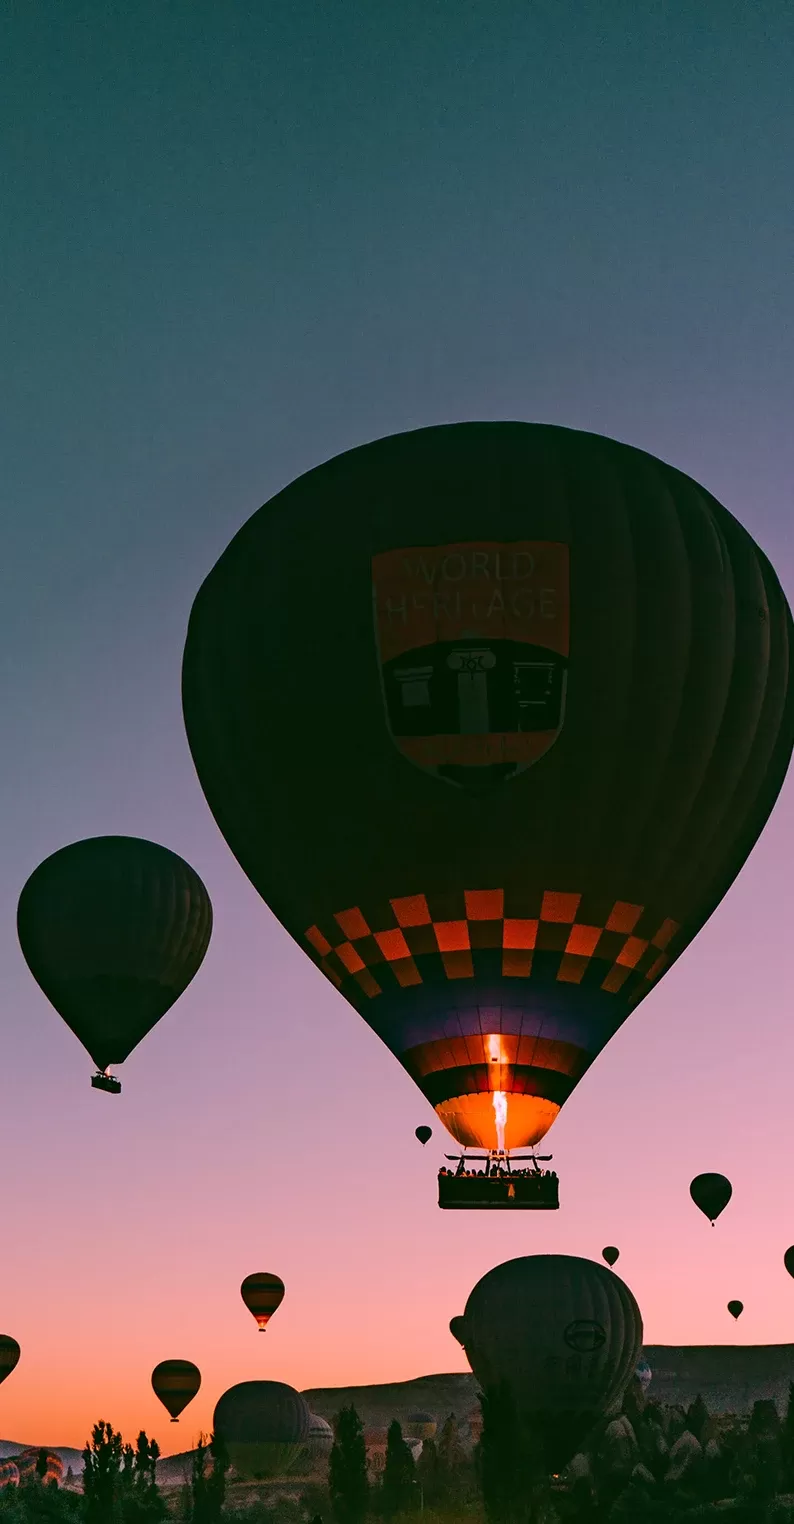 Pink and blue sky at nighttime filled with hot air balloons